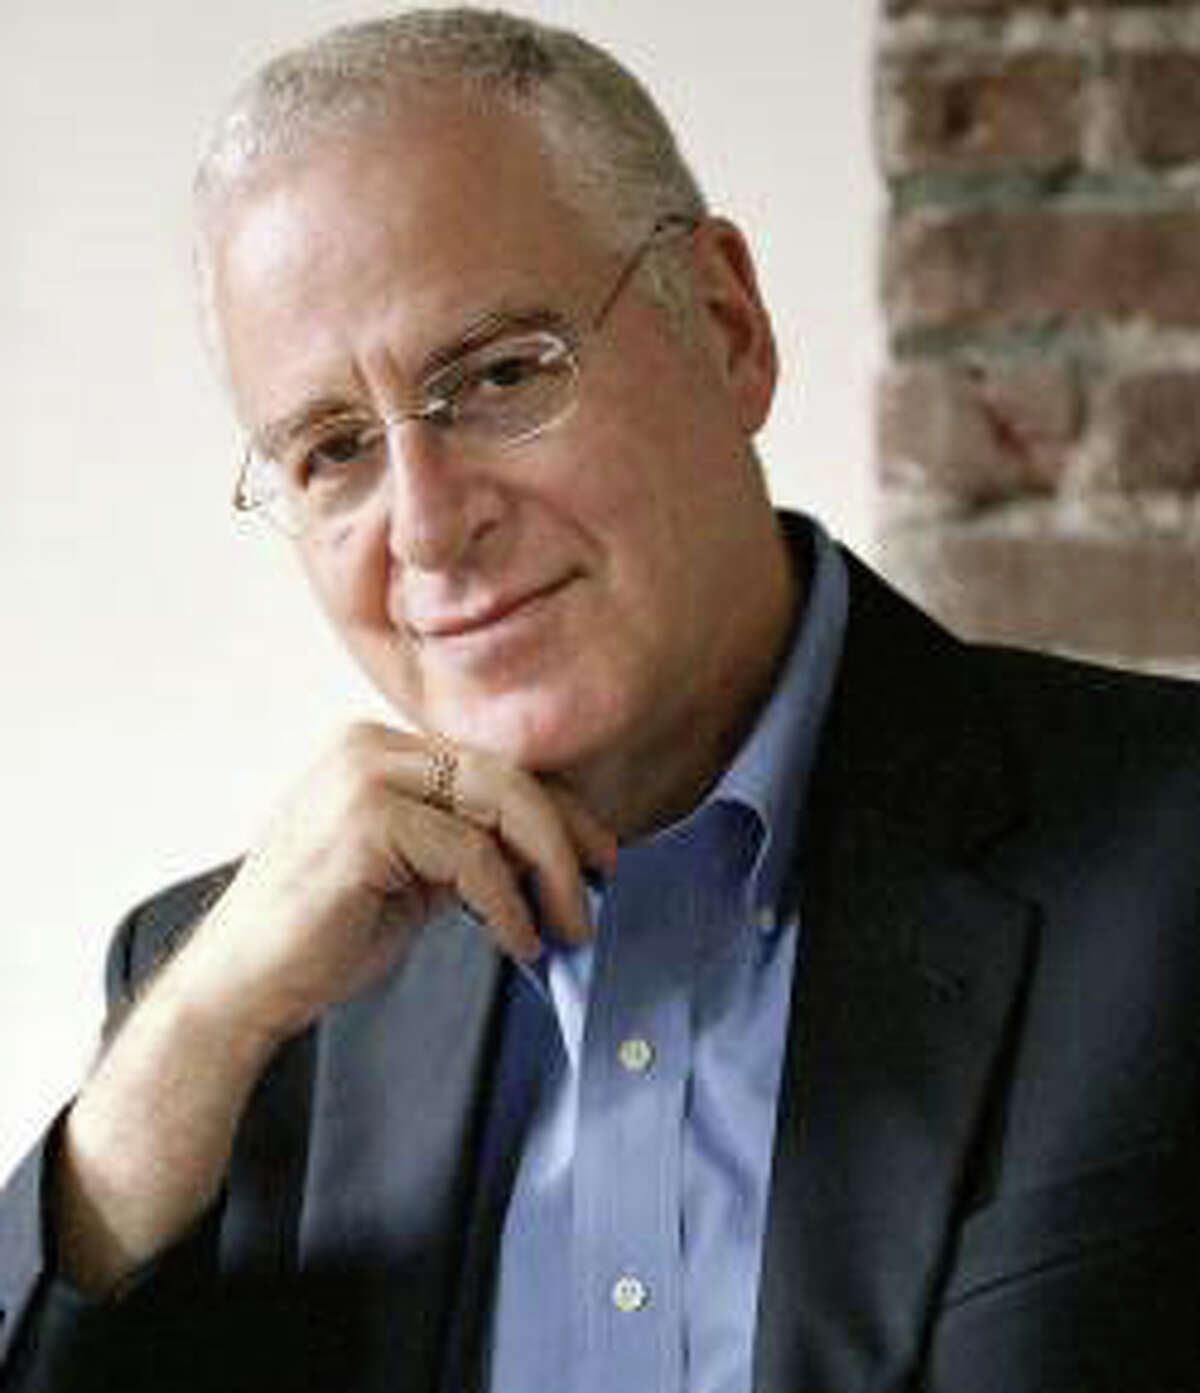 Ron Chernow, the Pulitzer Prize-winning author whose best-selling biography of Alexander Hamilton inspired the Pulitzer Prize-winning musical, "Hamilton," will be the honoree of this year's "BOOKED for the Evening" benefit at the Westport Library on May 26.